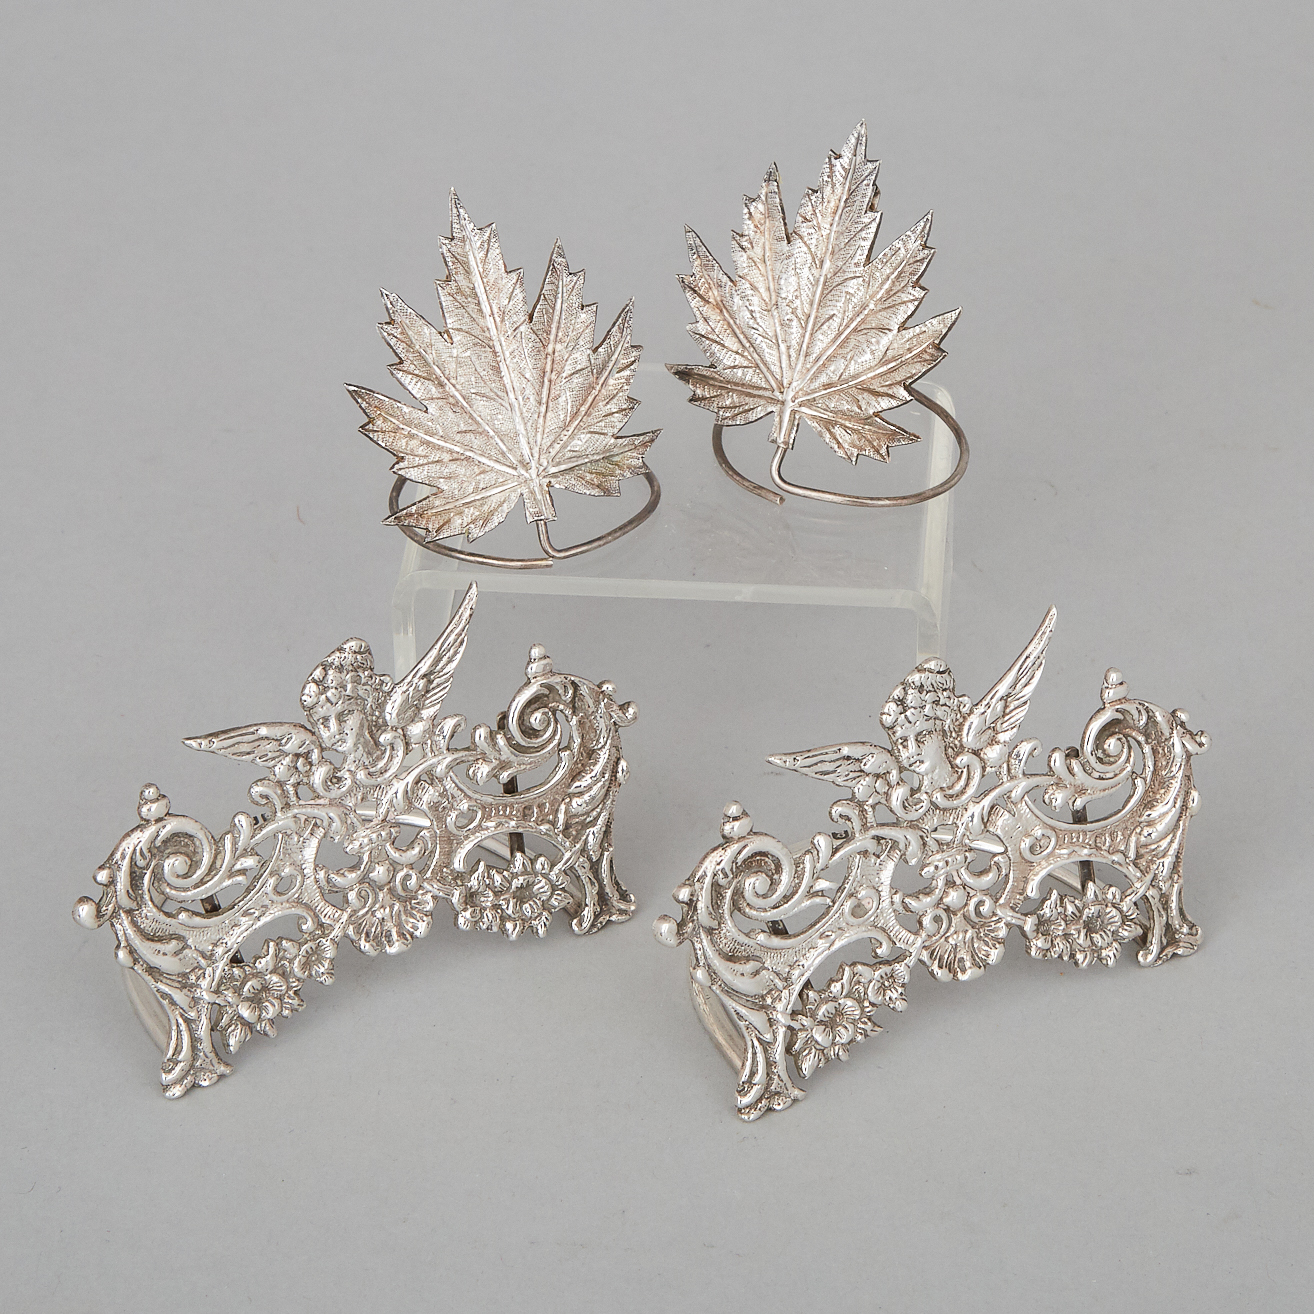 Pair of Edwardian Silver Menu Holders, Stuart Clifford, London, 1902, and Another Pair, early 20th century